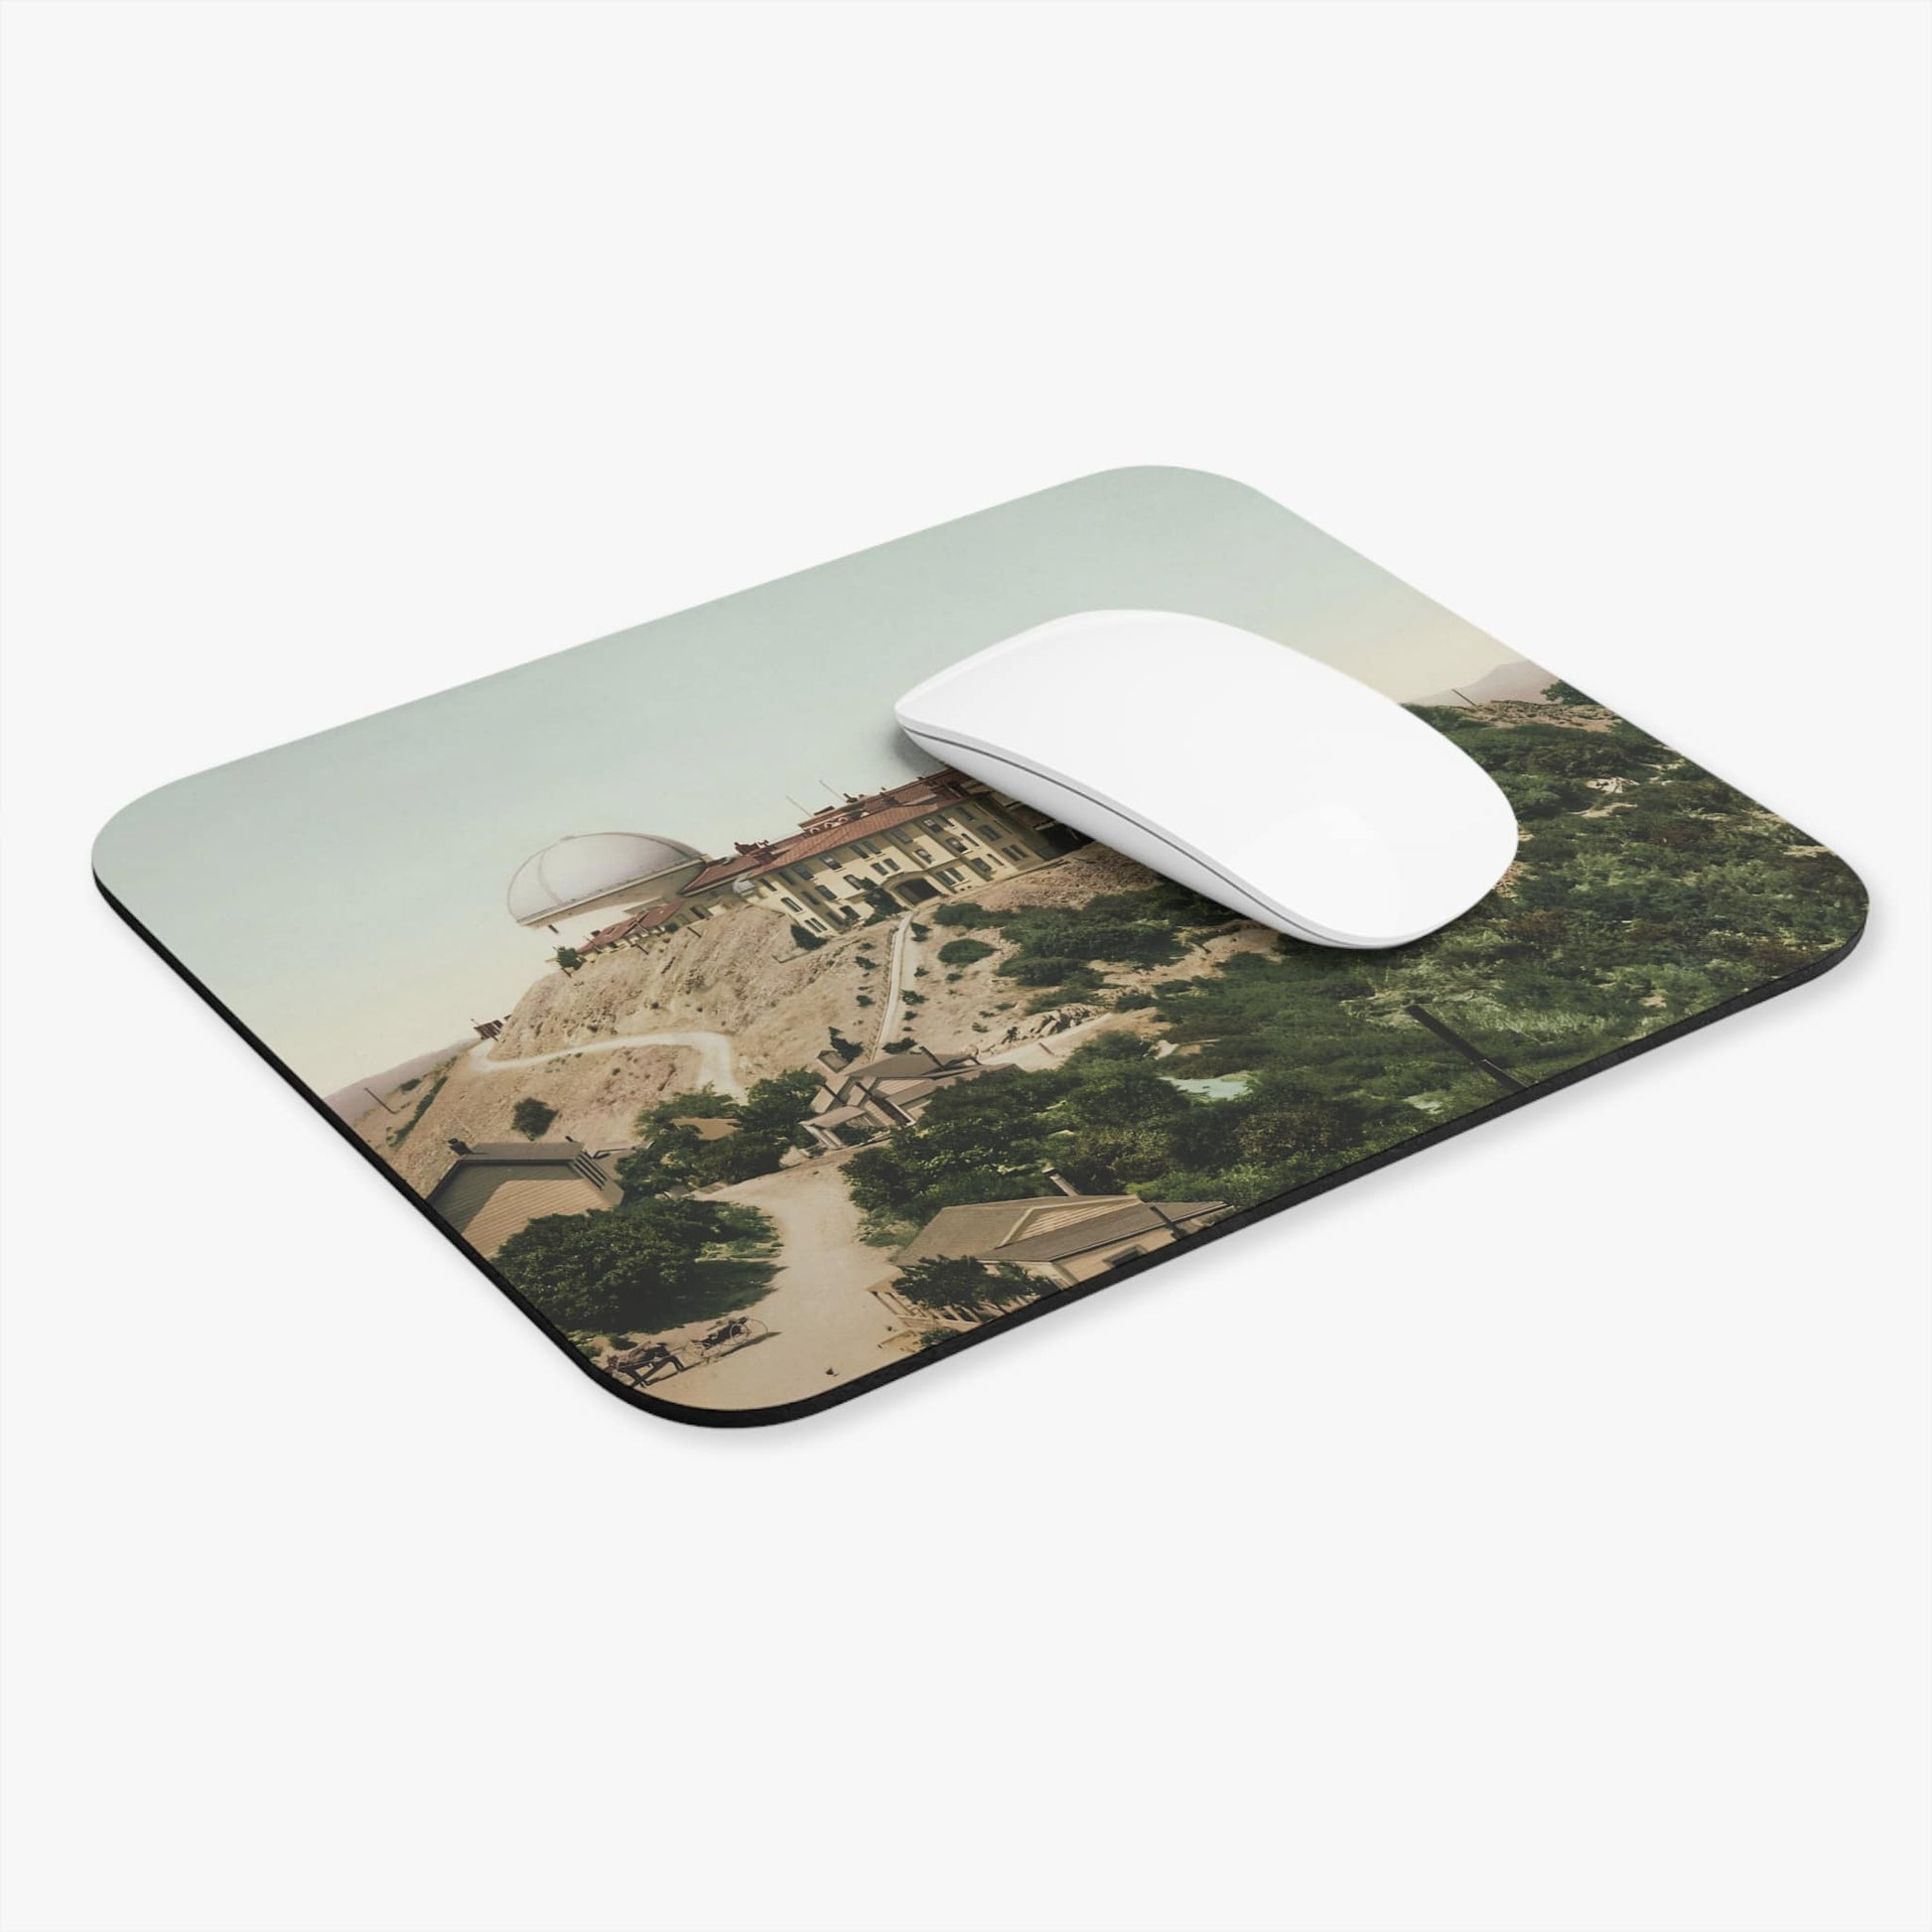 Vintage Photograph Computer Desk Mouse Pad With White Mouse